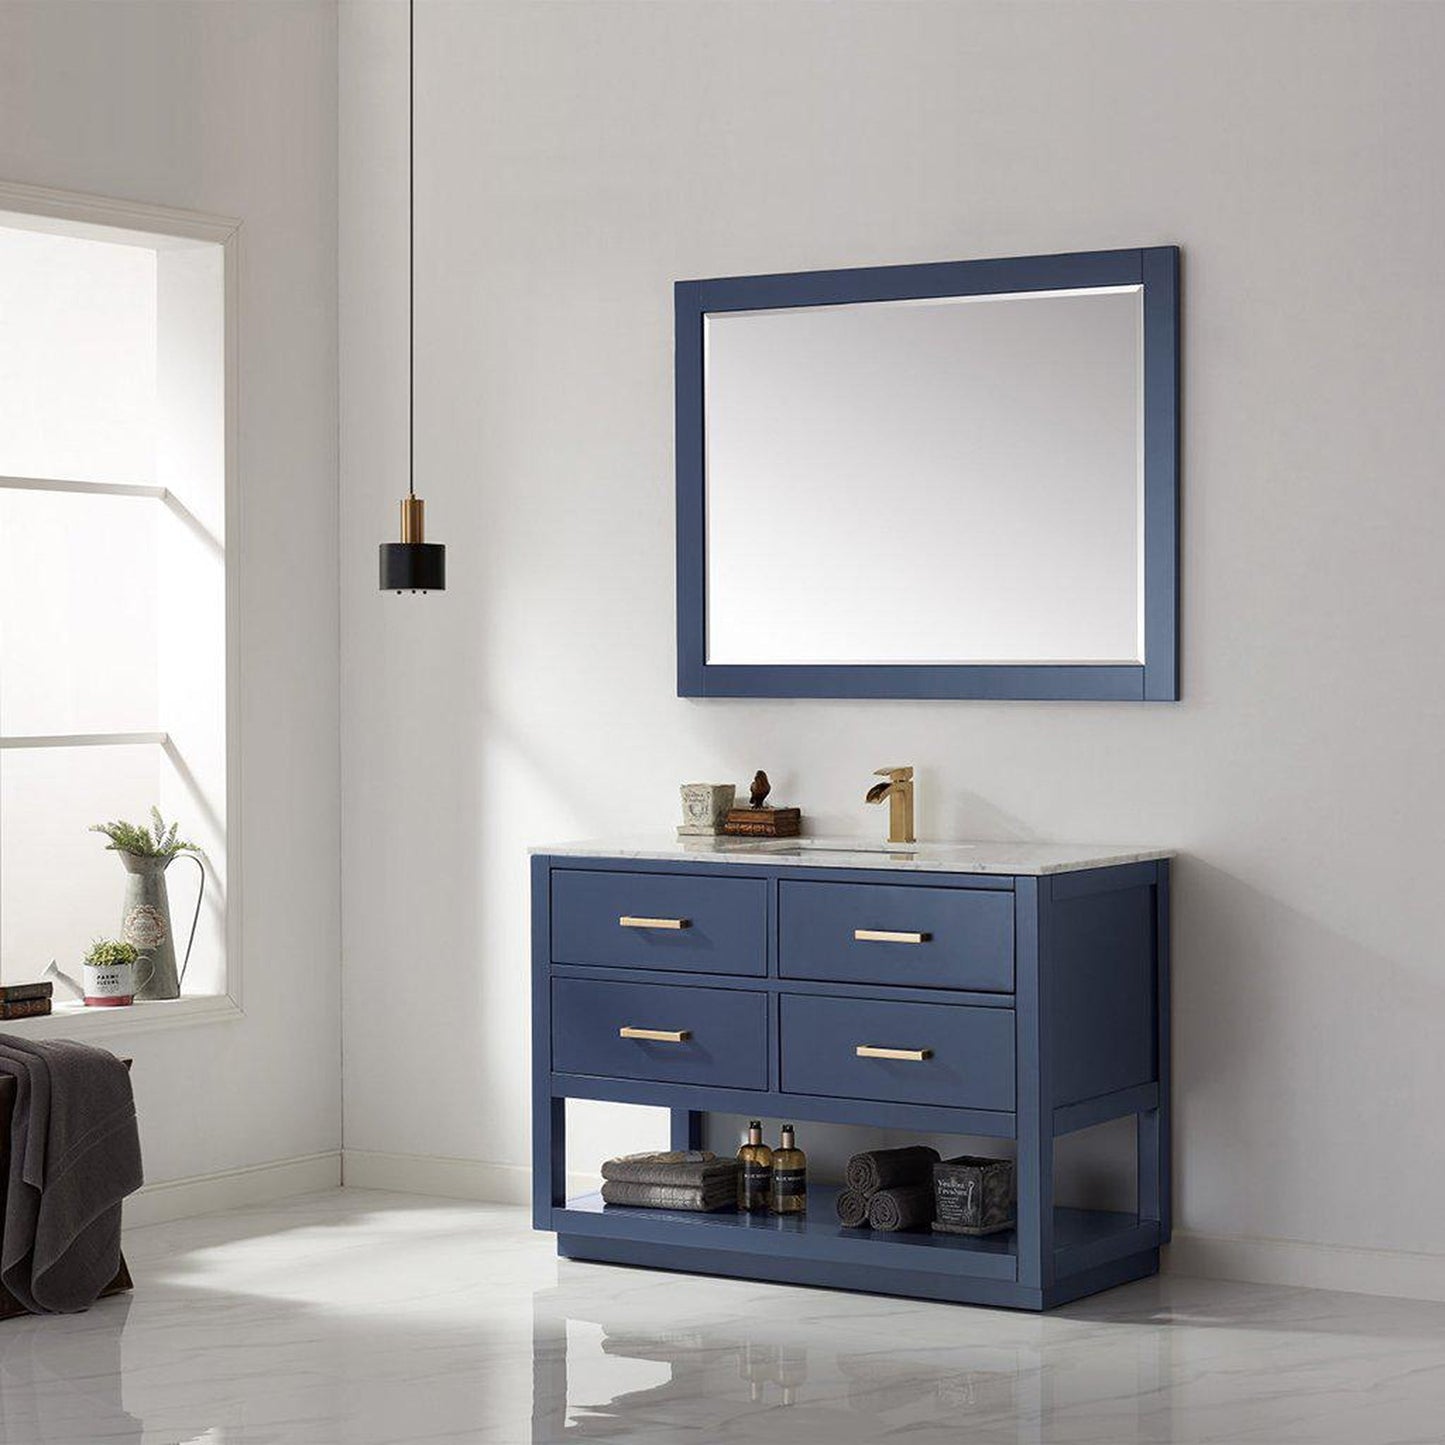 Altair Remi 48" Single Royal Blue Freestanding Bathroom Vanity Set With Mirror, Natural Carrara White Marble Top, Rectangular Undermount Ceramic Sink, and Overflow